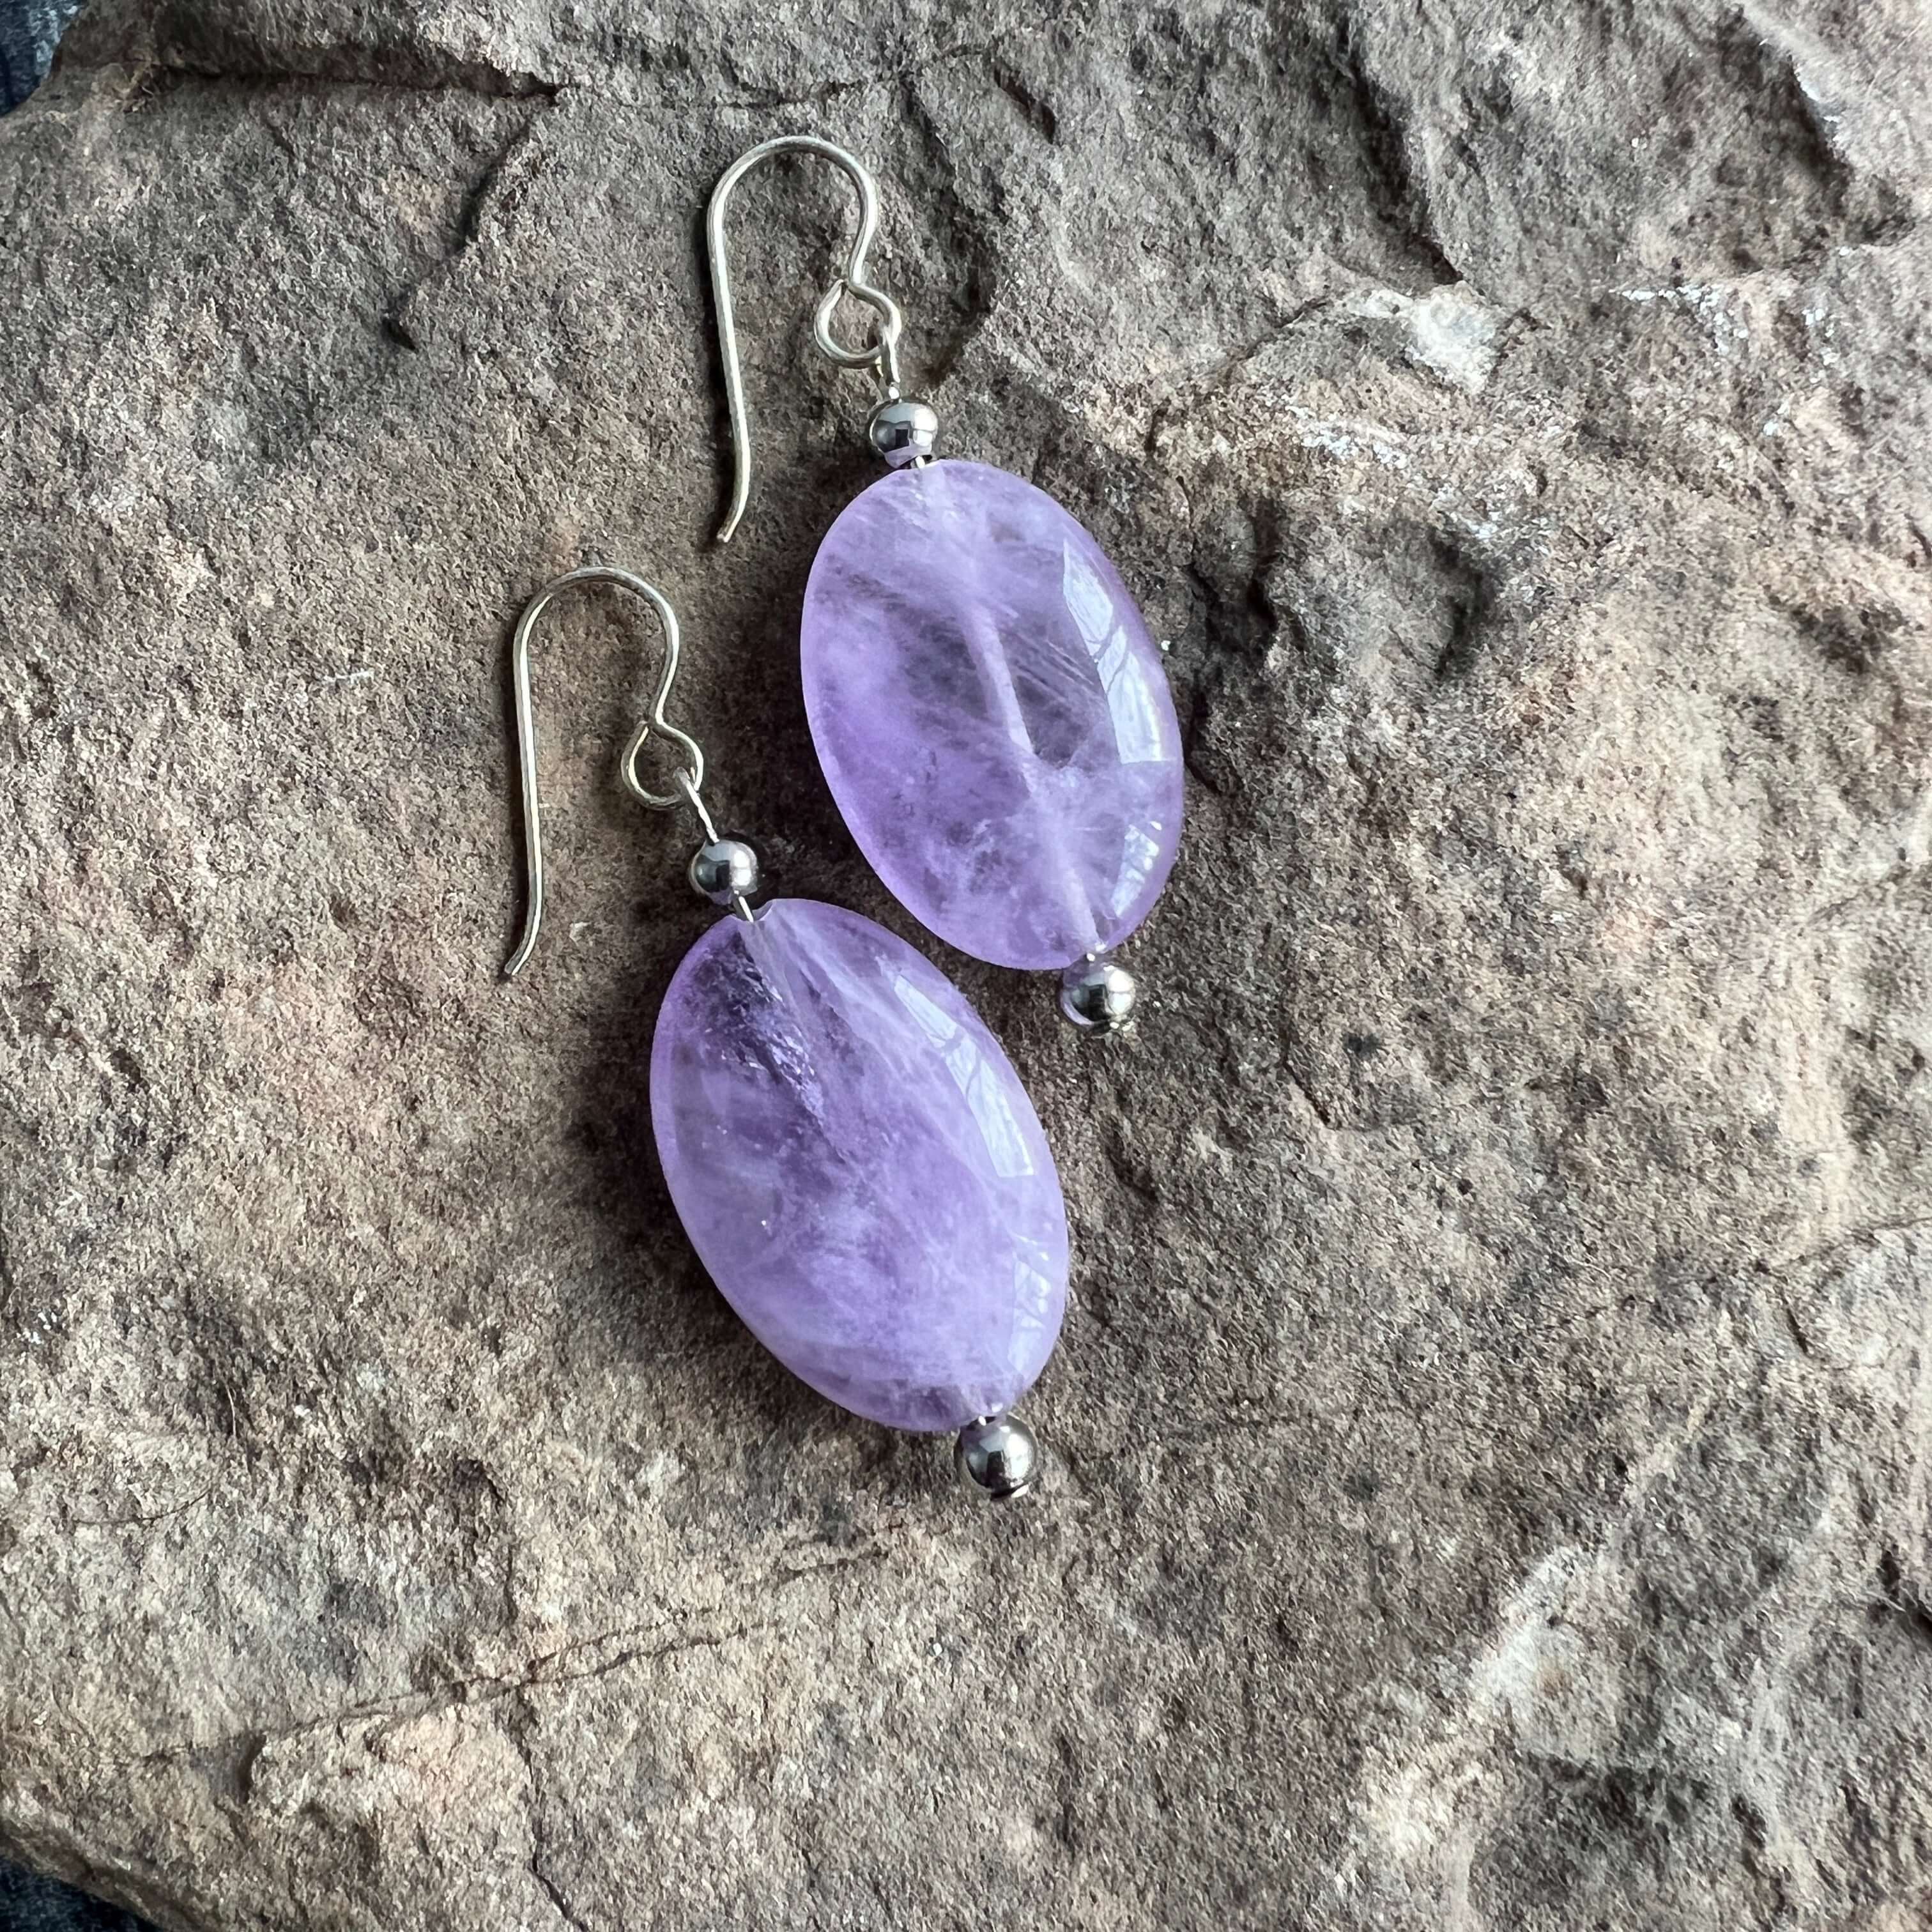 Lavender Amethyst Earrings These earrings are made with high-quality Amethyst stones which bring serenity to the wearer. Amethyst is a stone of serenity. This stone helps to calm the mind. It was once known as a “Gem of Fire” by ancient cultures. It has b